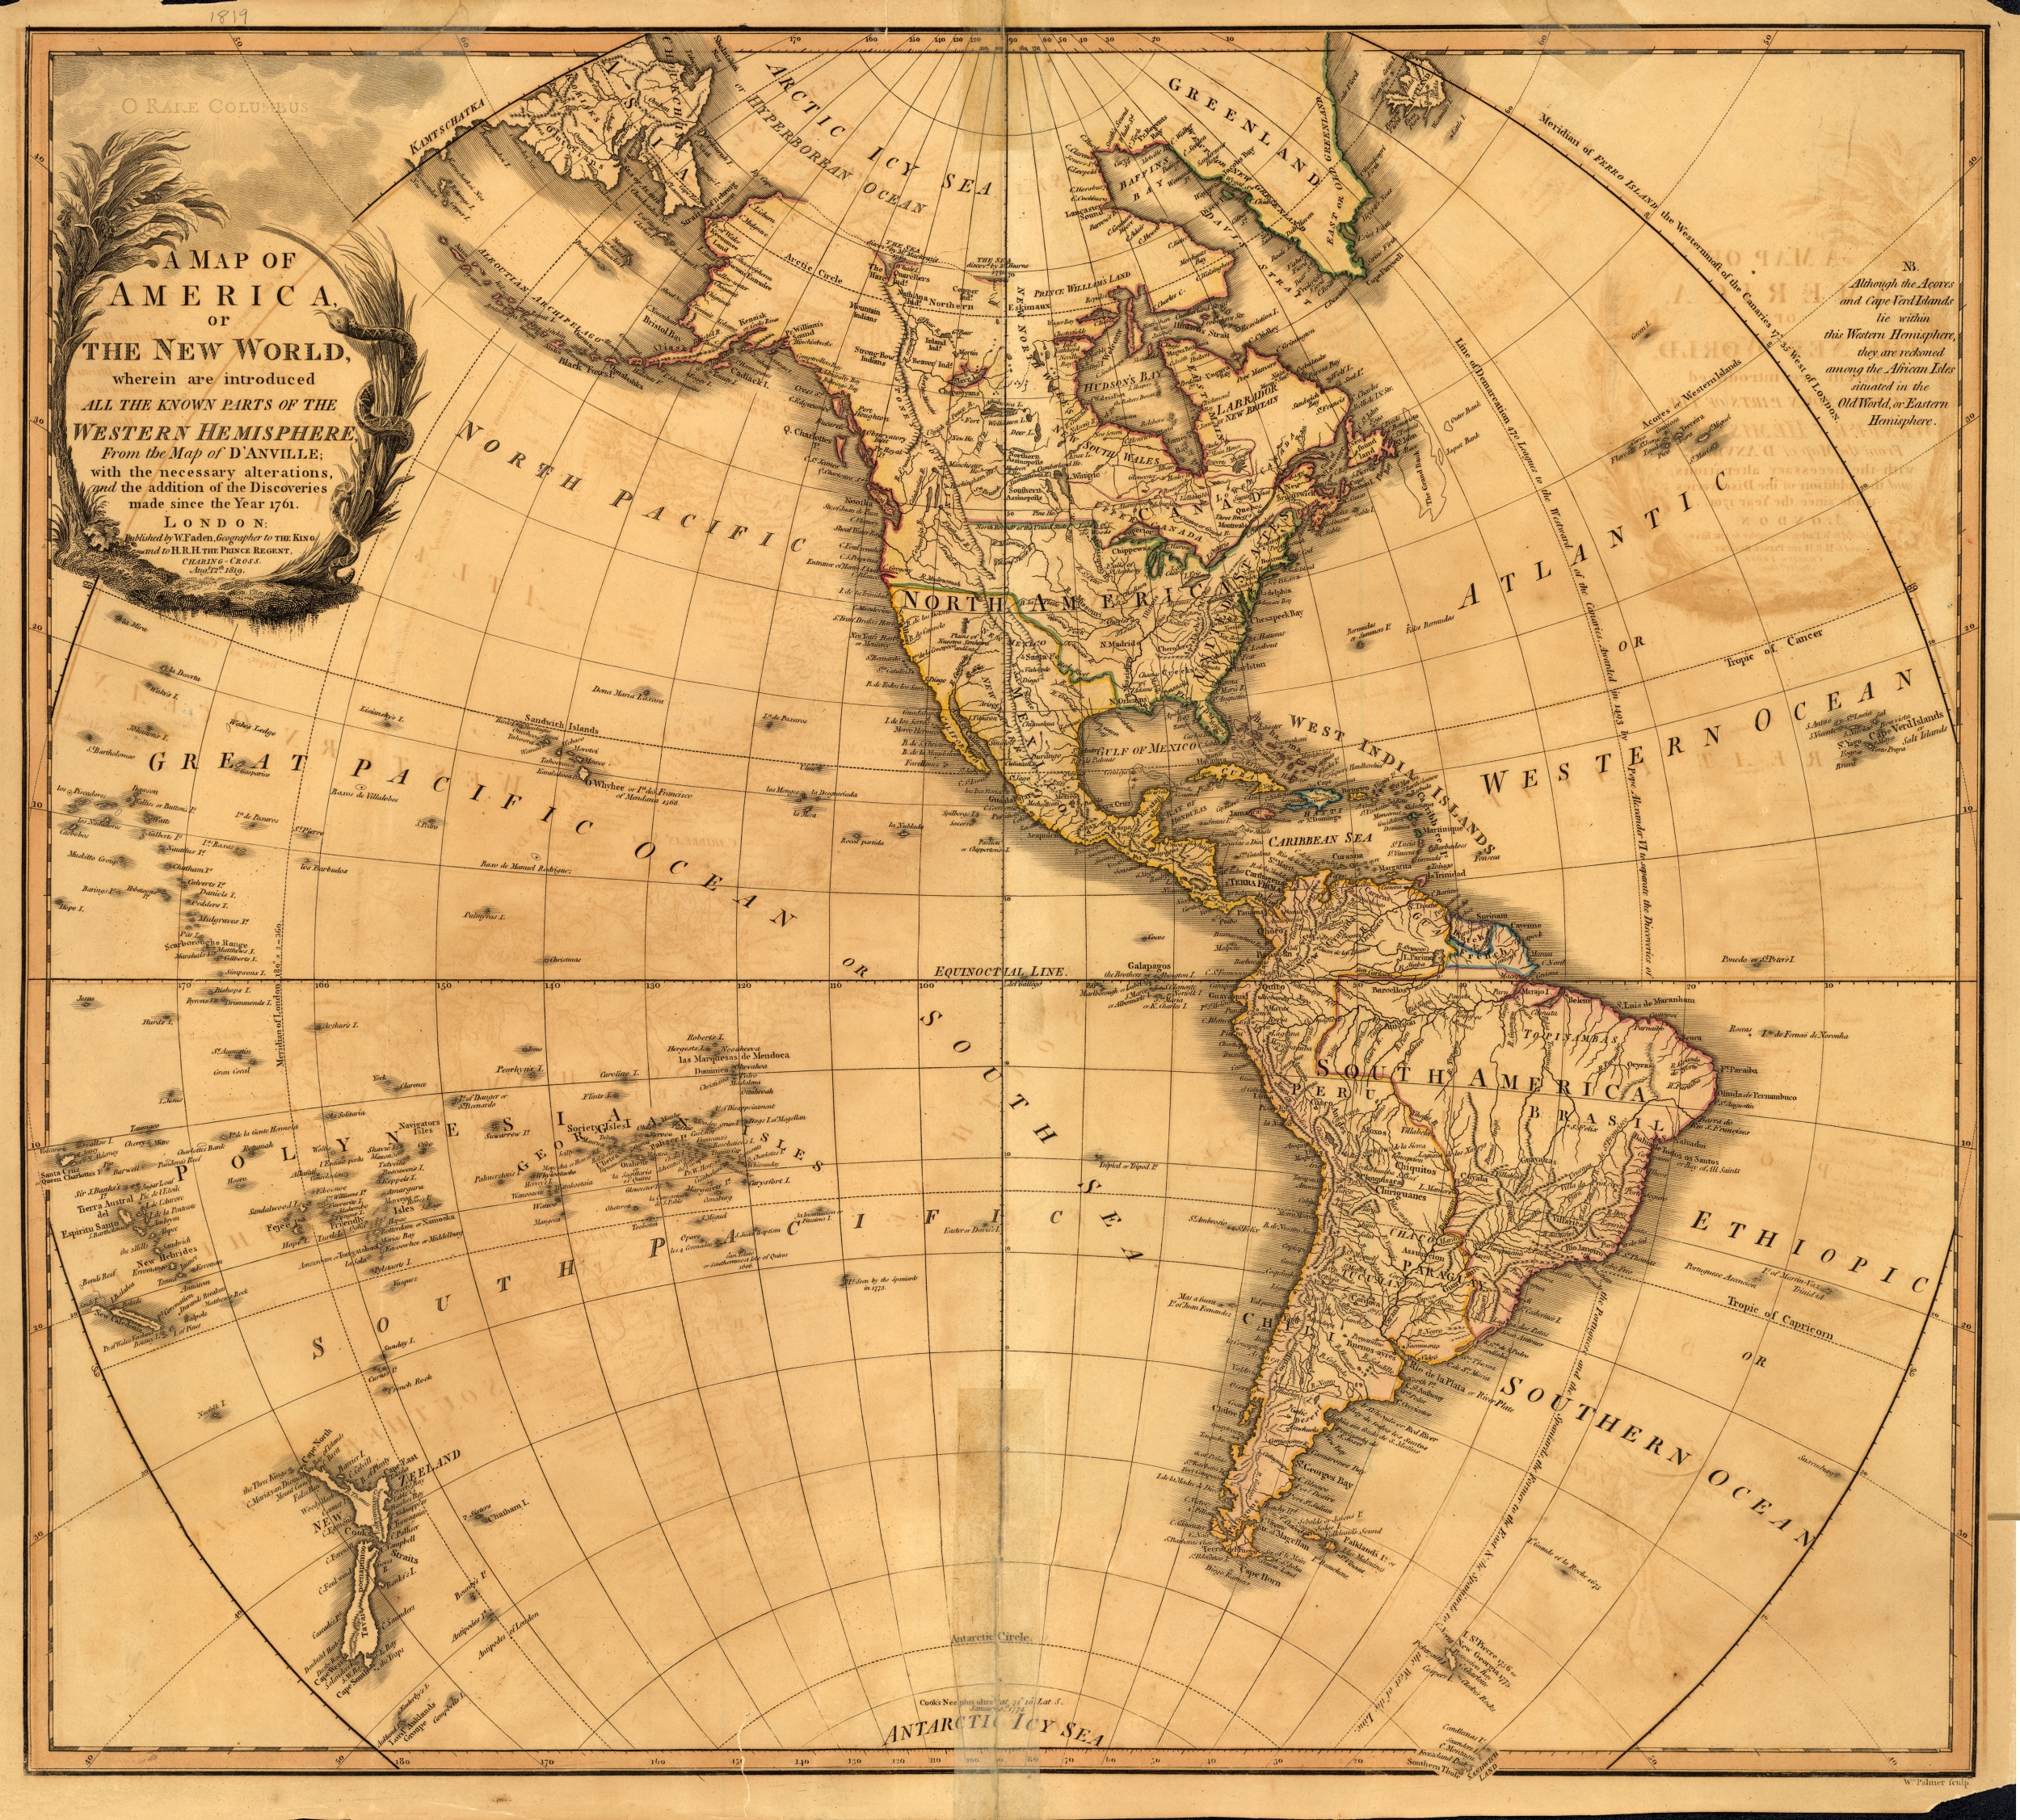 Map of America and the New World, 1819